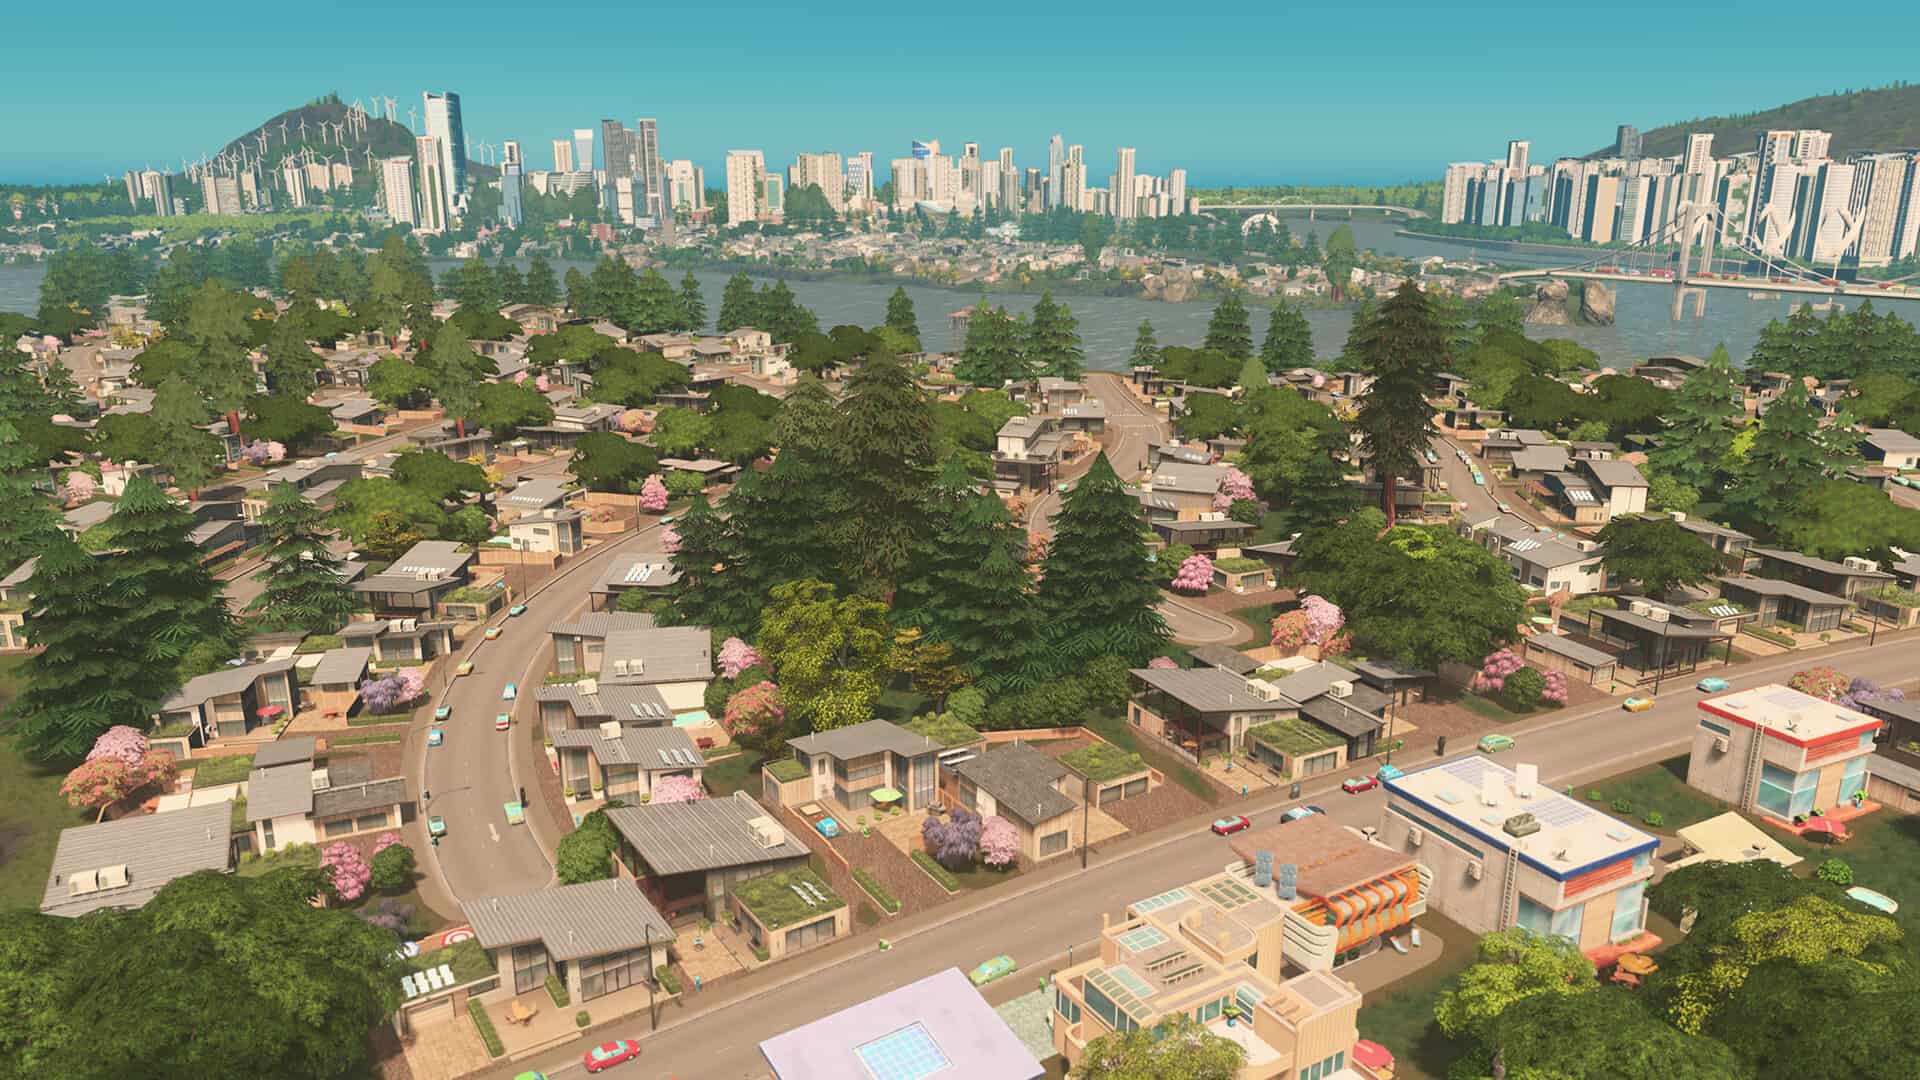 Mod The Sims - City Skyline Backdrop REMOVER (Overwrite)